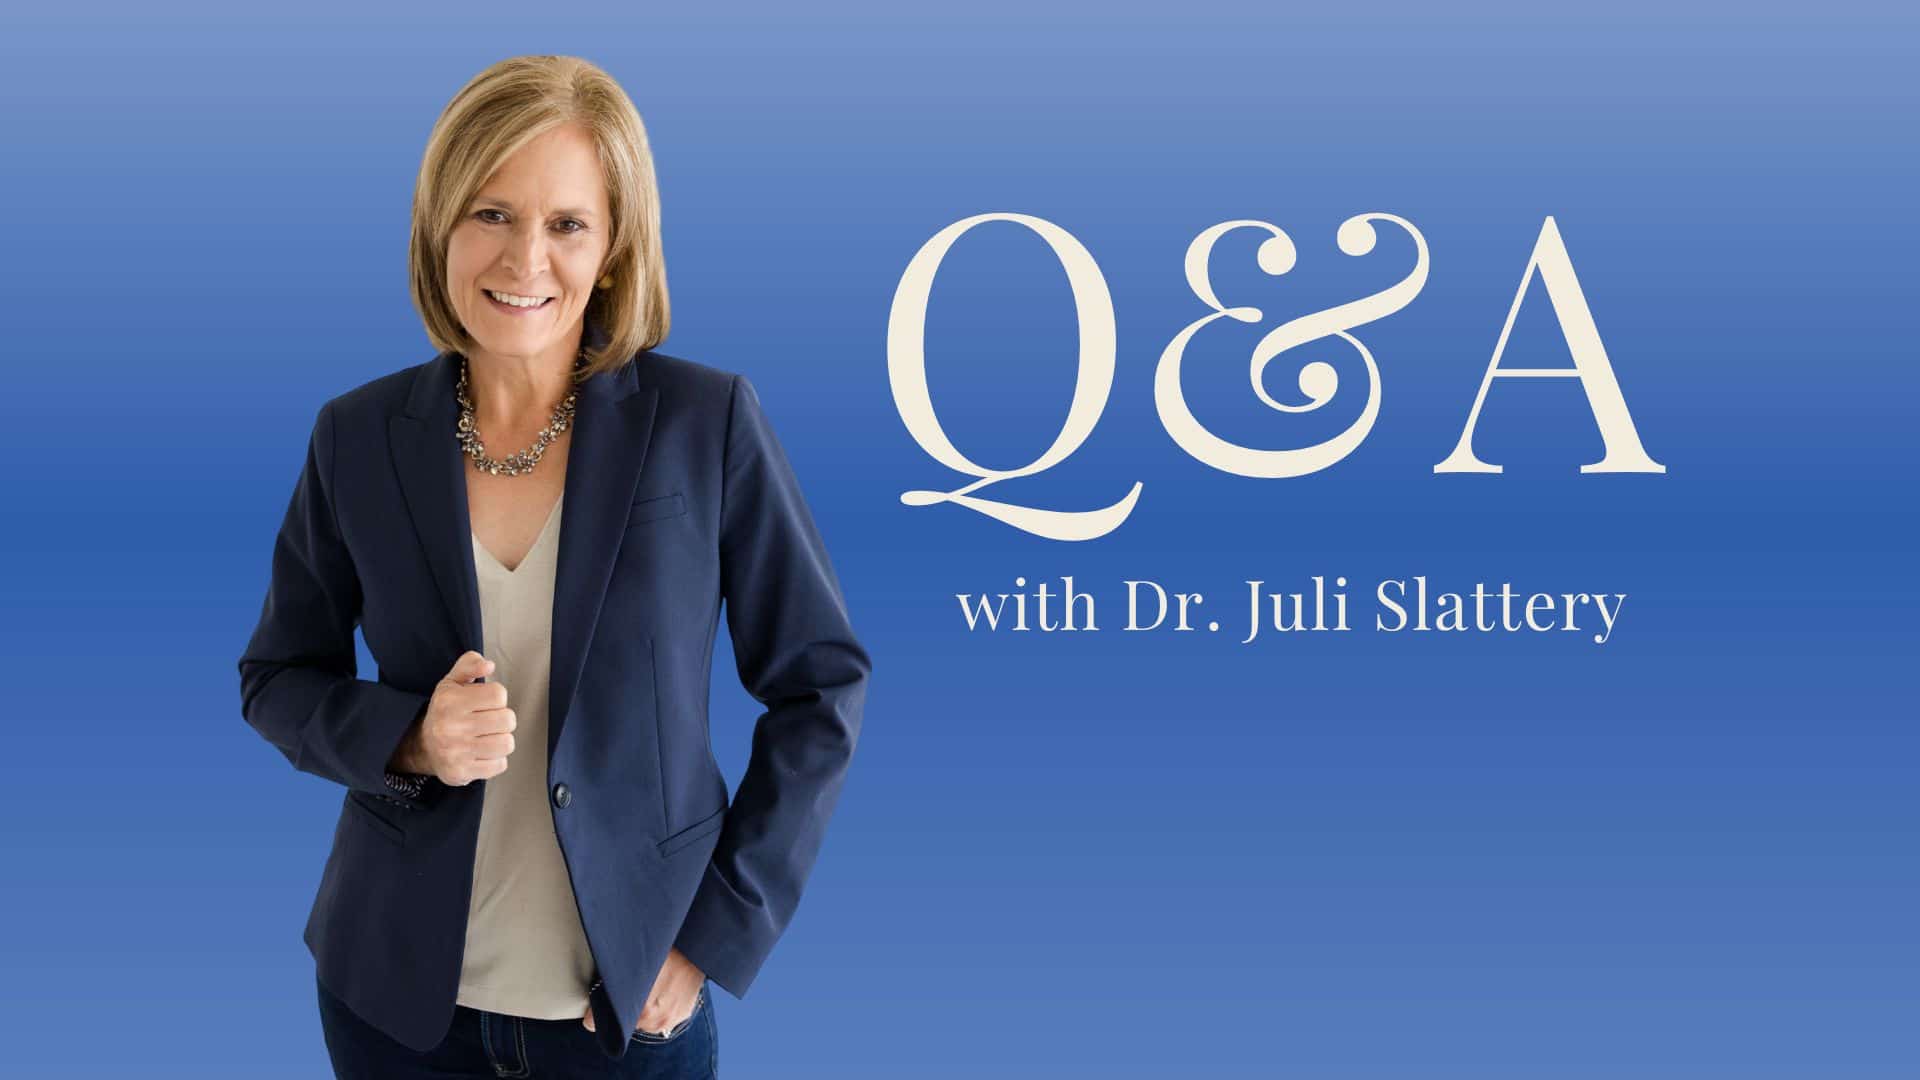 Q&A: How do I Get Past the Shame of Sexual Sin?